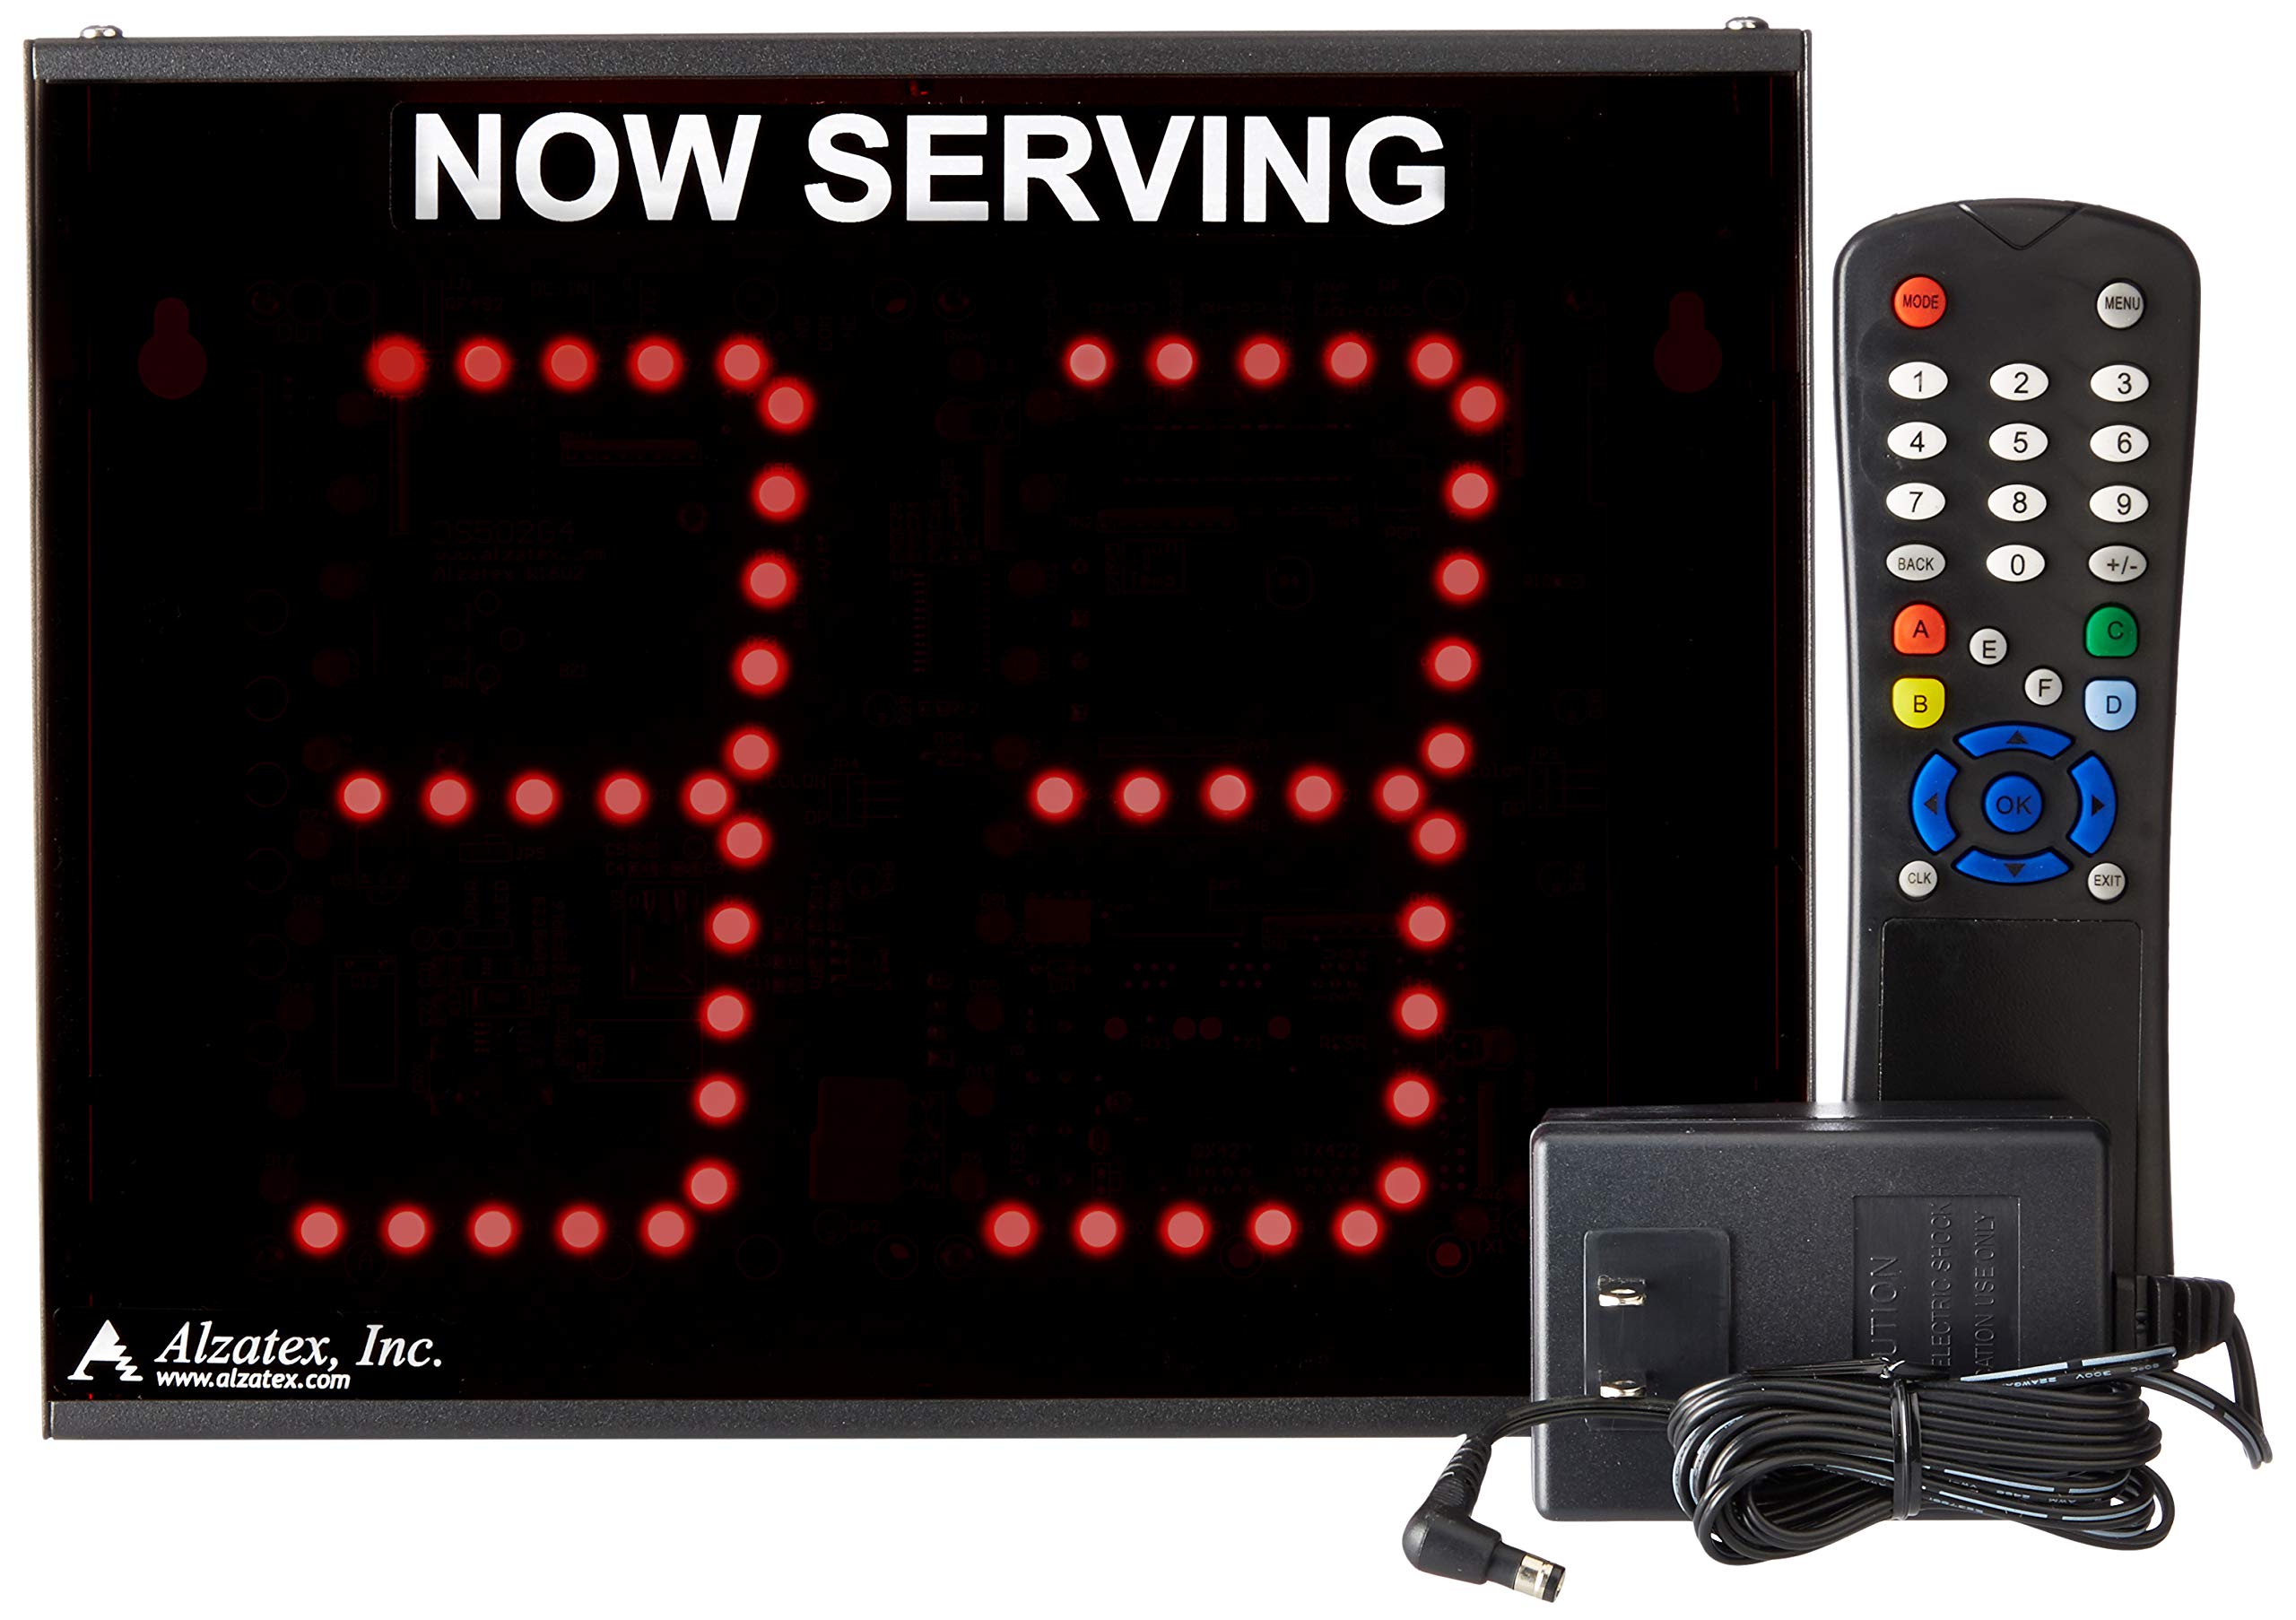 Alzatex 2-Digit Take-a-Number Display with 2 Buttons and Infrared Remote